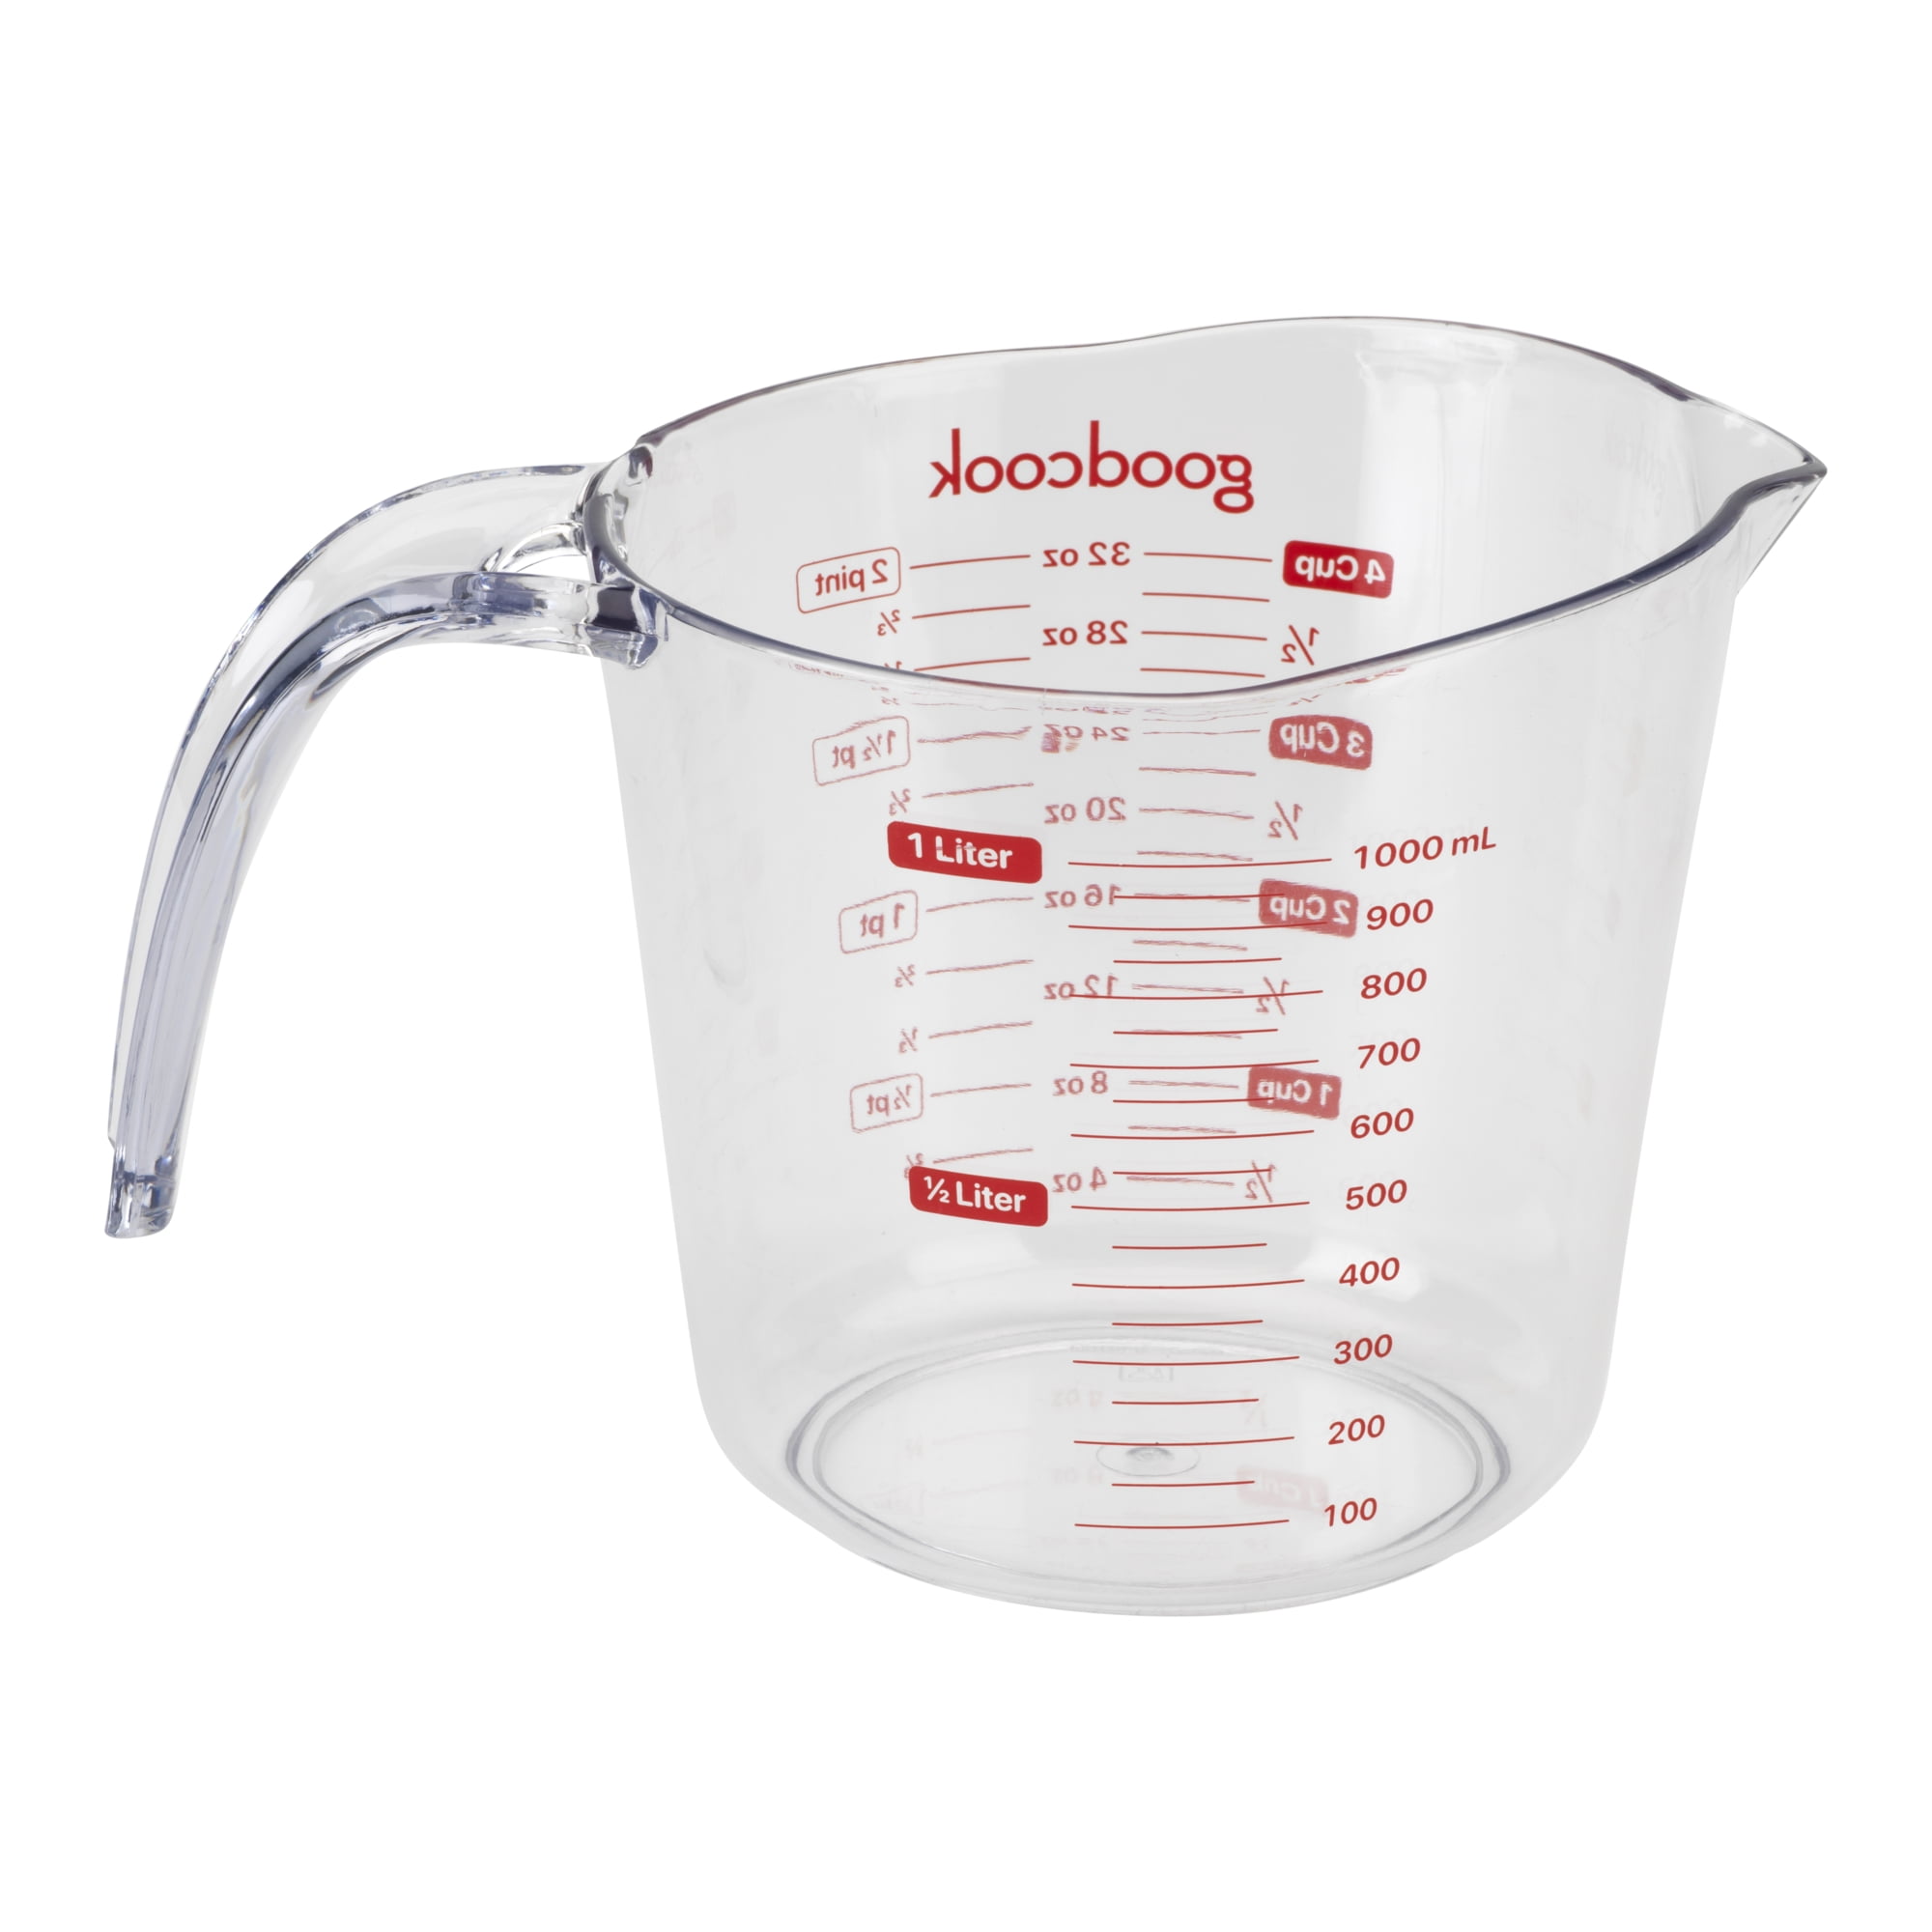 Good Cook Measuring Cup Plastic 2 Cup - Each